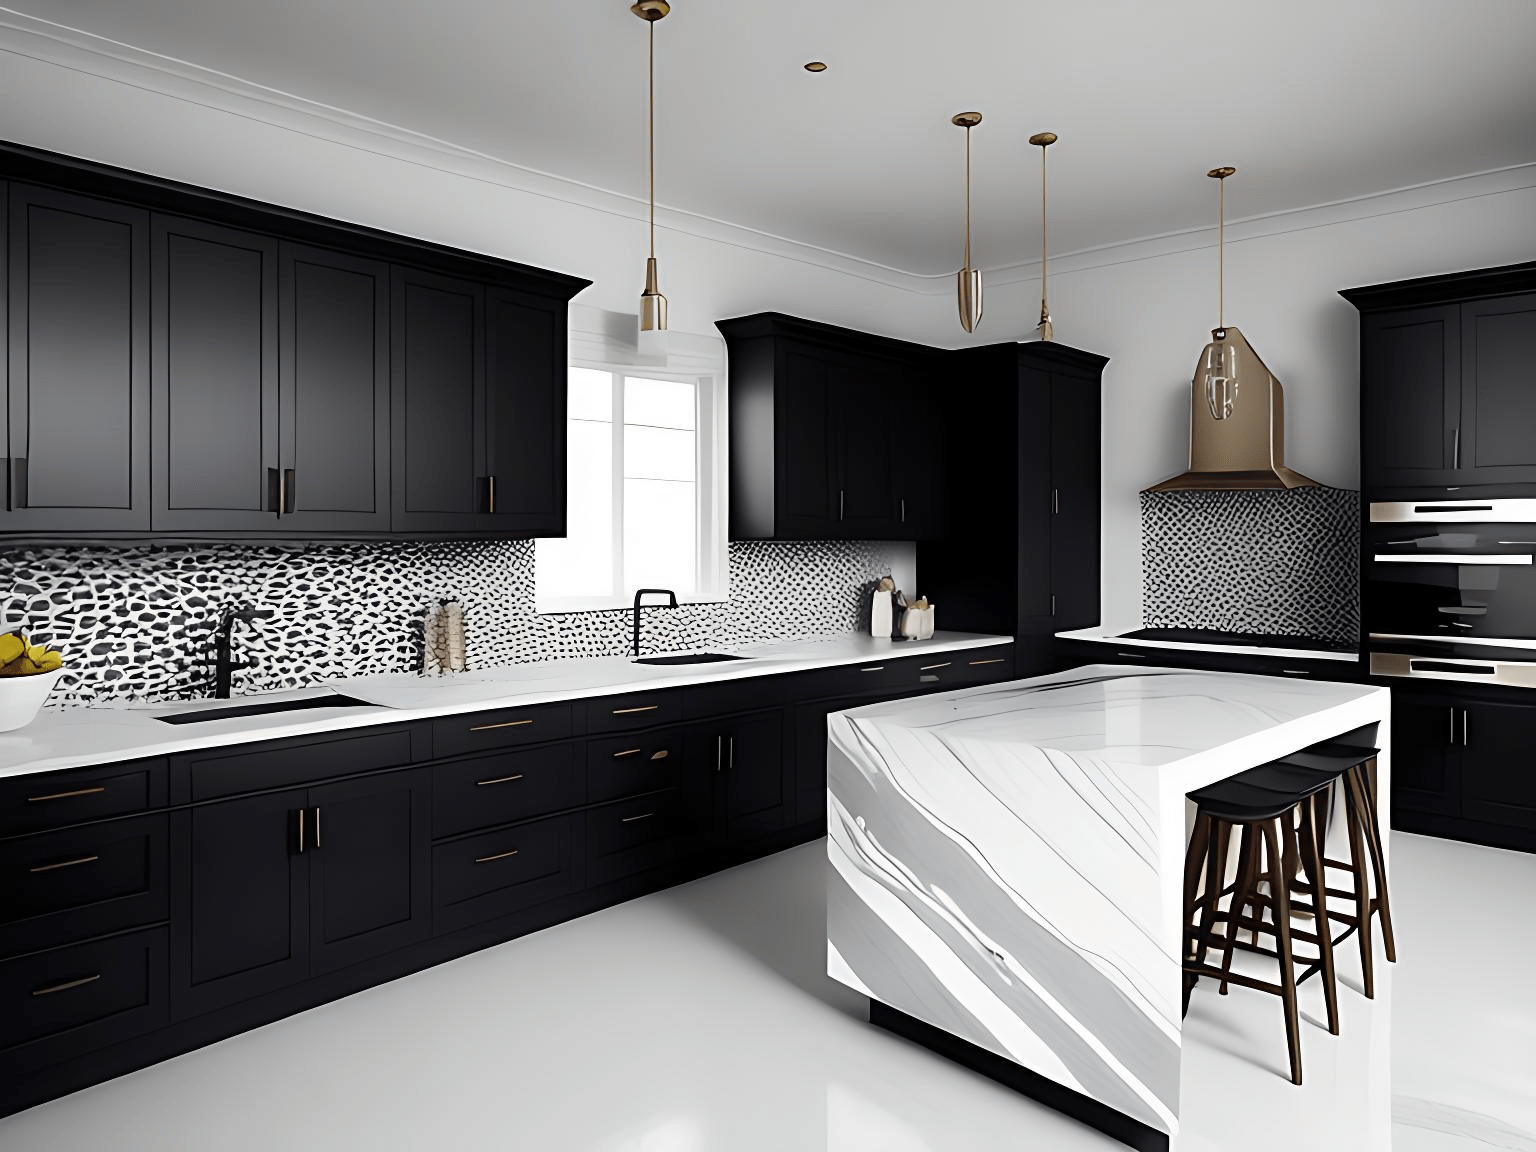 Decorating Ideas For Black Kitchen Cabinets | Cabinets Matttroy